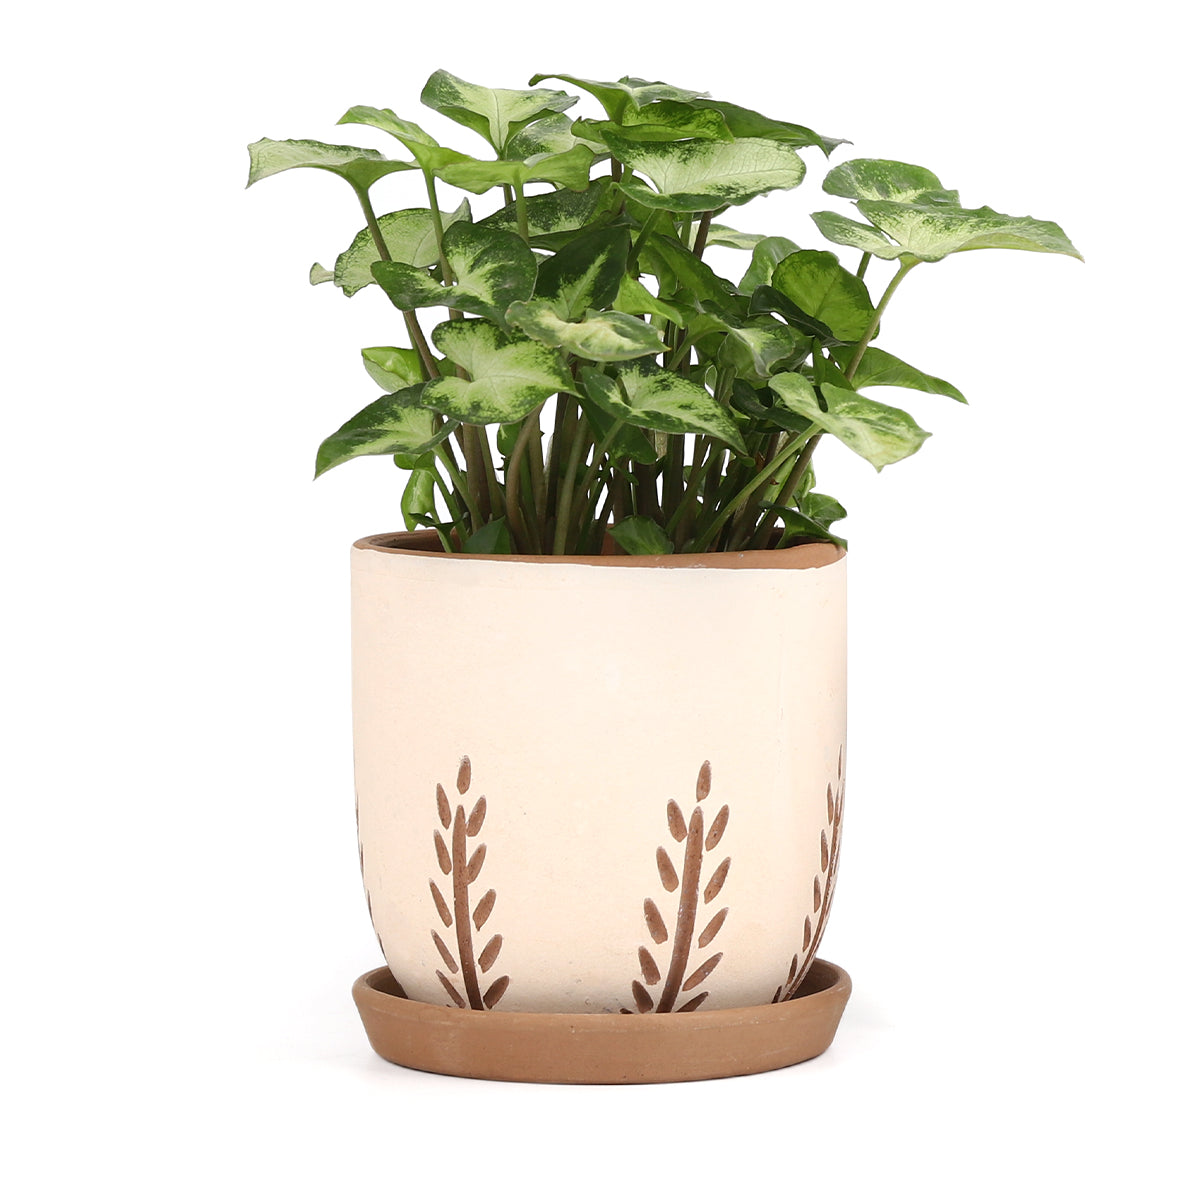 Clay White Vertical Leaf Pattern Pot with Drainage Hole & Saucer, Terracotta Pot for Planting Succulent and Houseplant